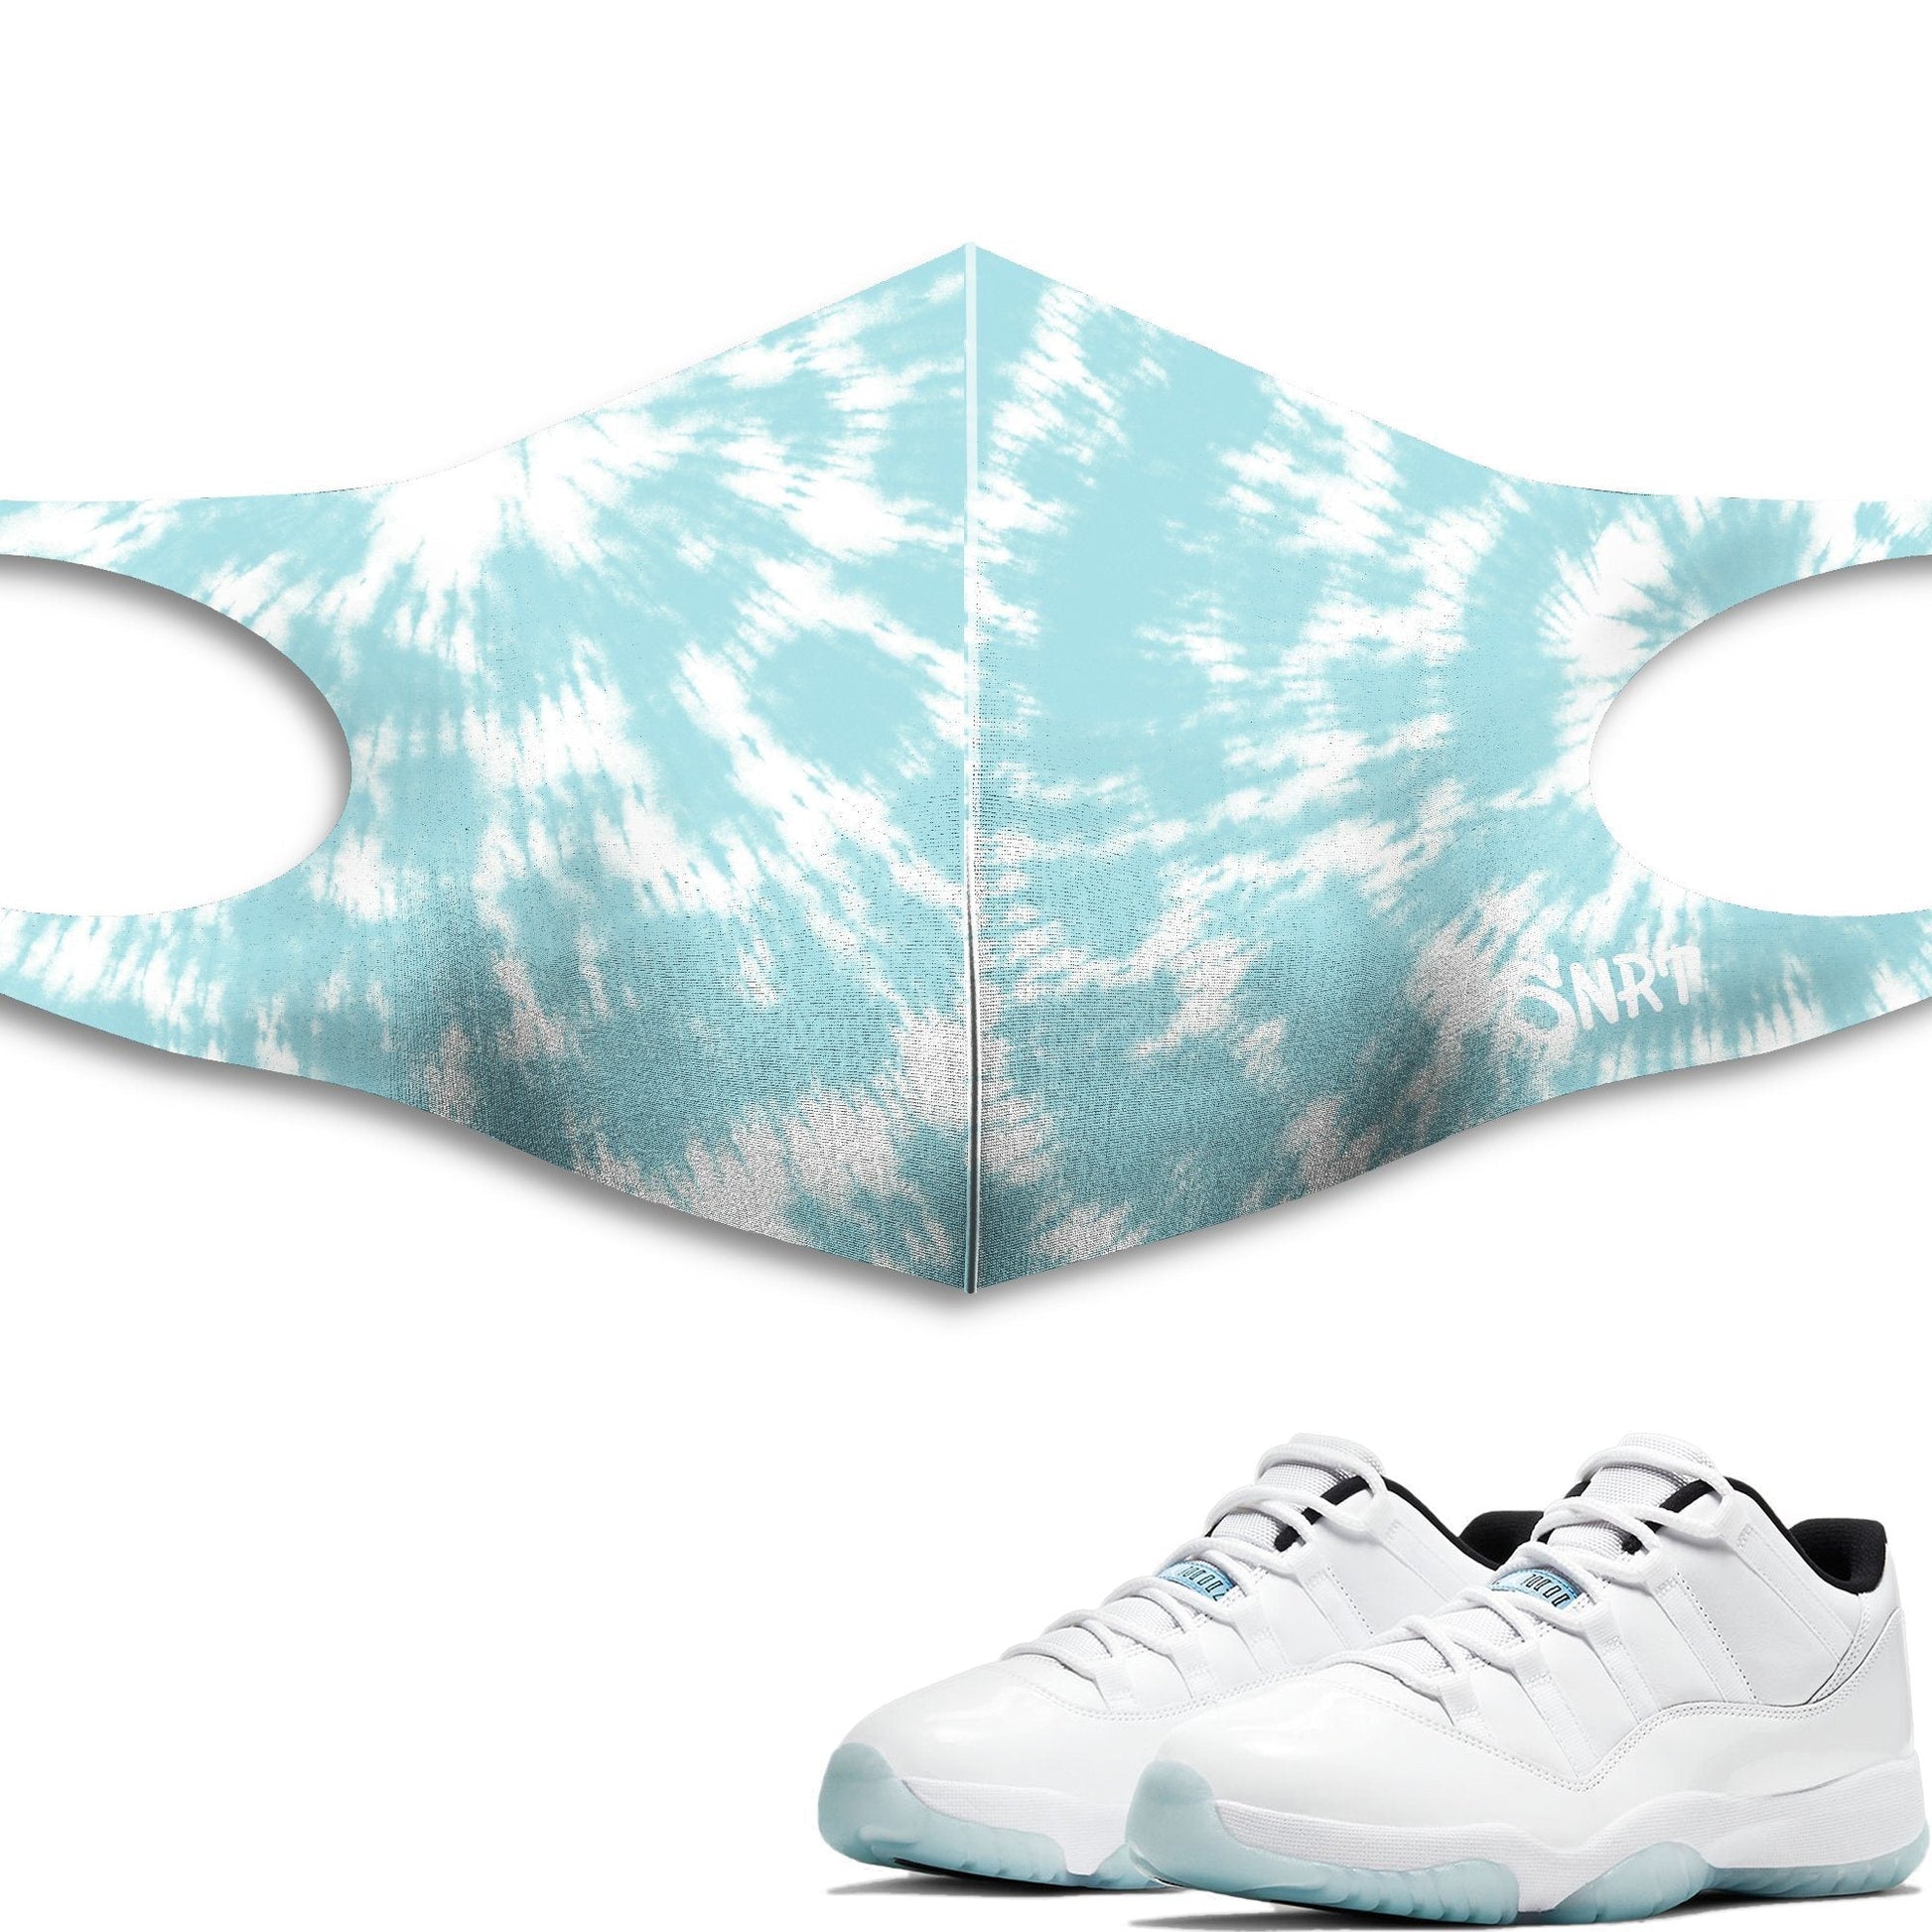 Air Jordan 11 Retro Legend Blue Sneaker Matching Mask Outfits AJ11 Legend Blue Sneaker Matching Accessories Collection Drip Gear Zone Sneaker Matching Clothing Unisex High Quality Face Mask Tie Dye Pattern design Mask